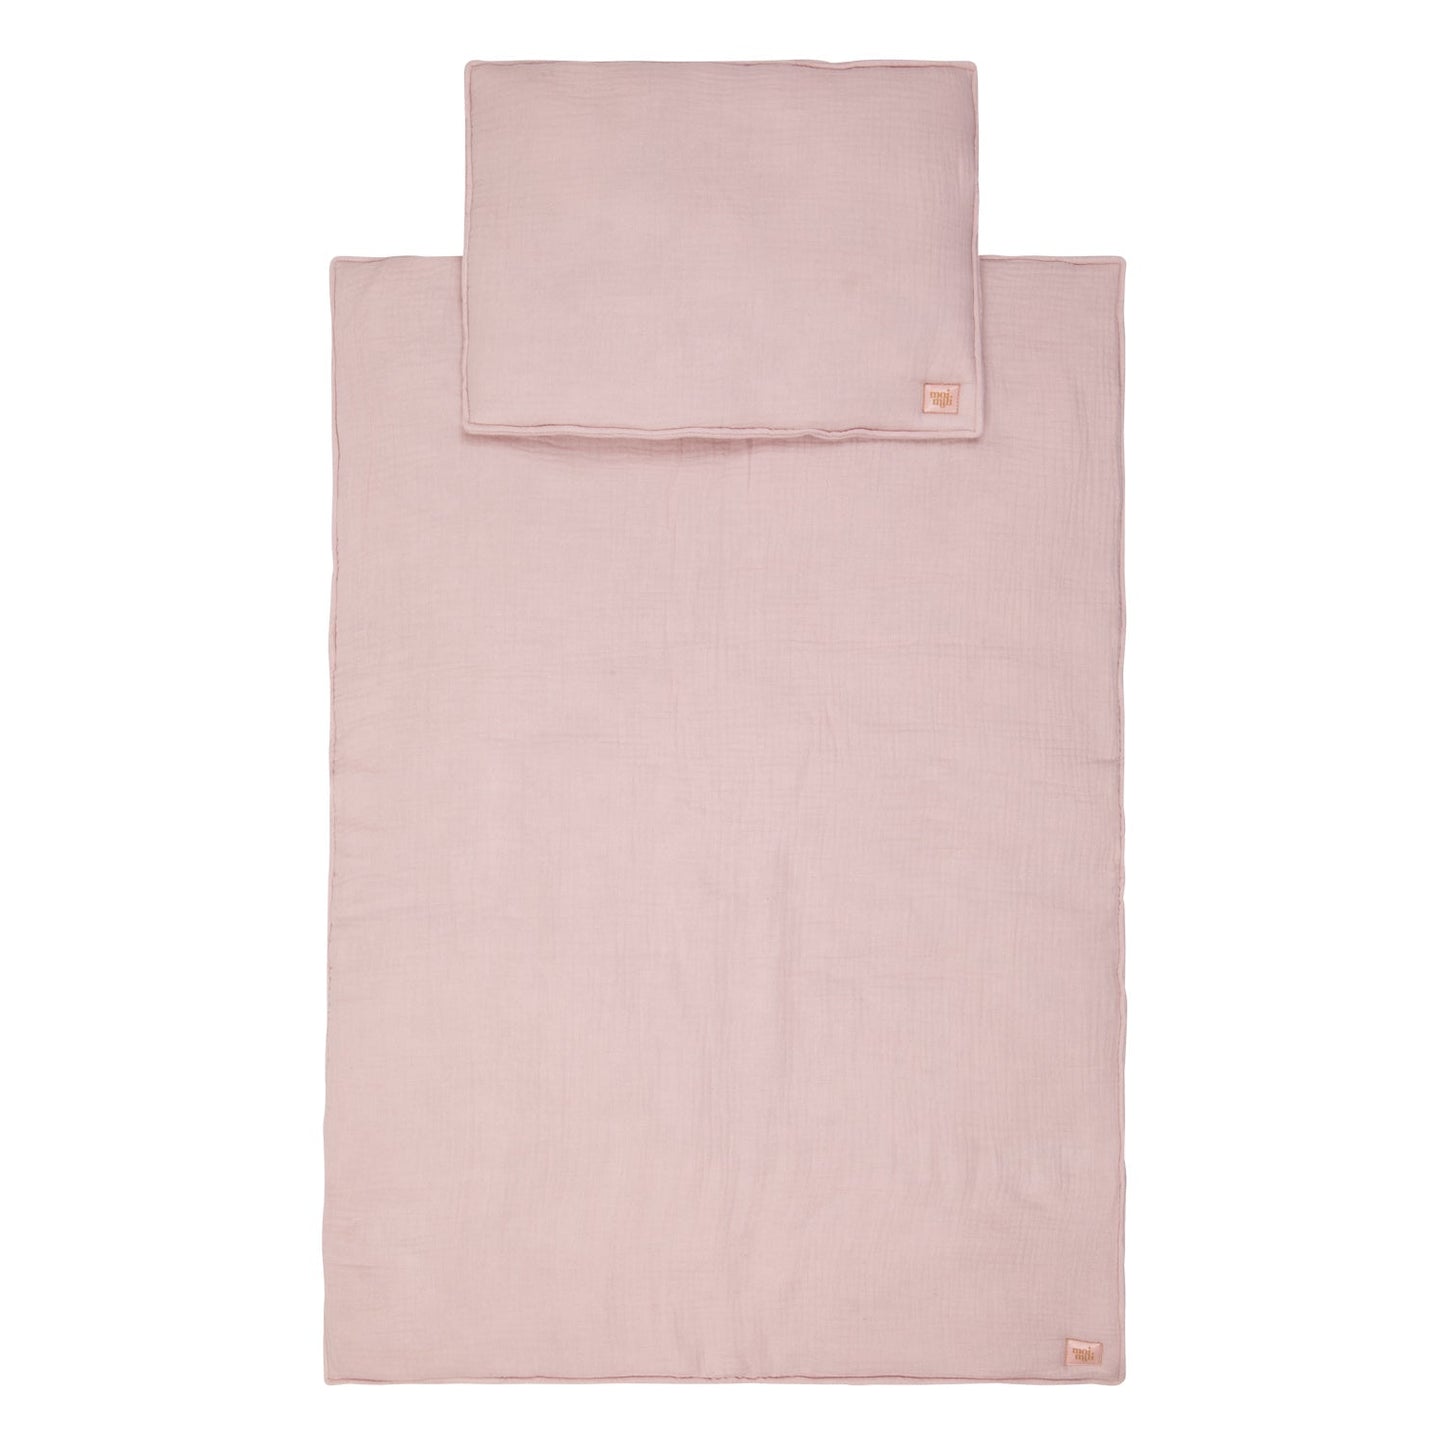 Muslin "Baby Pink" Child Cover Set by Moi Mili